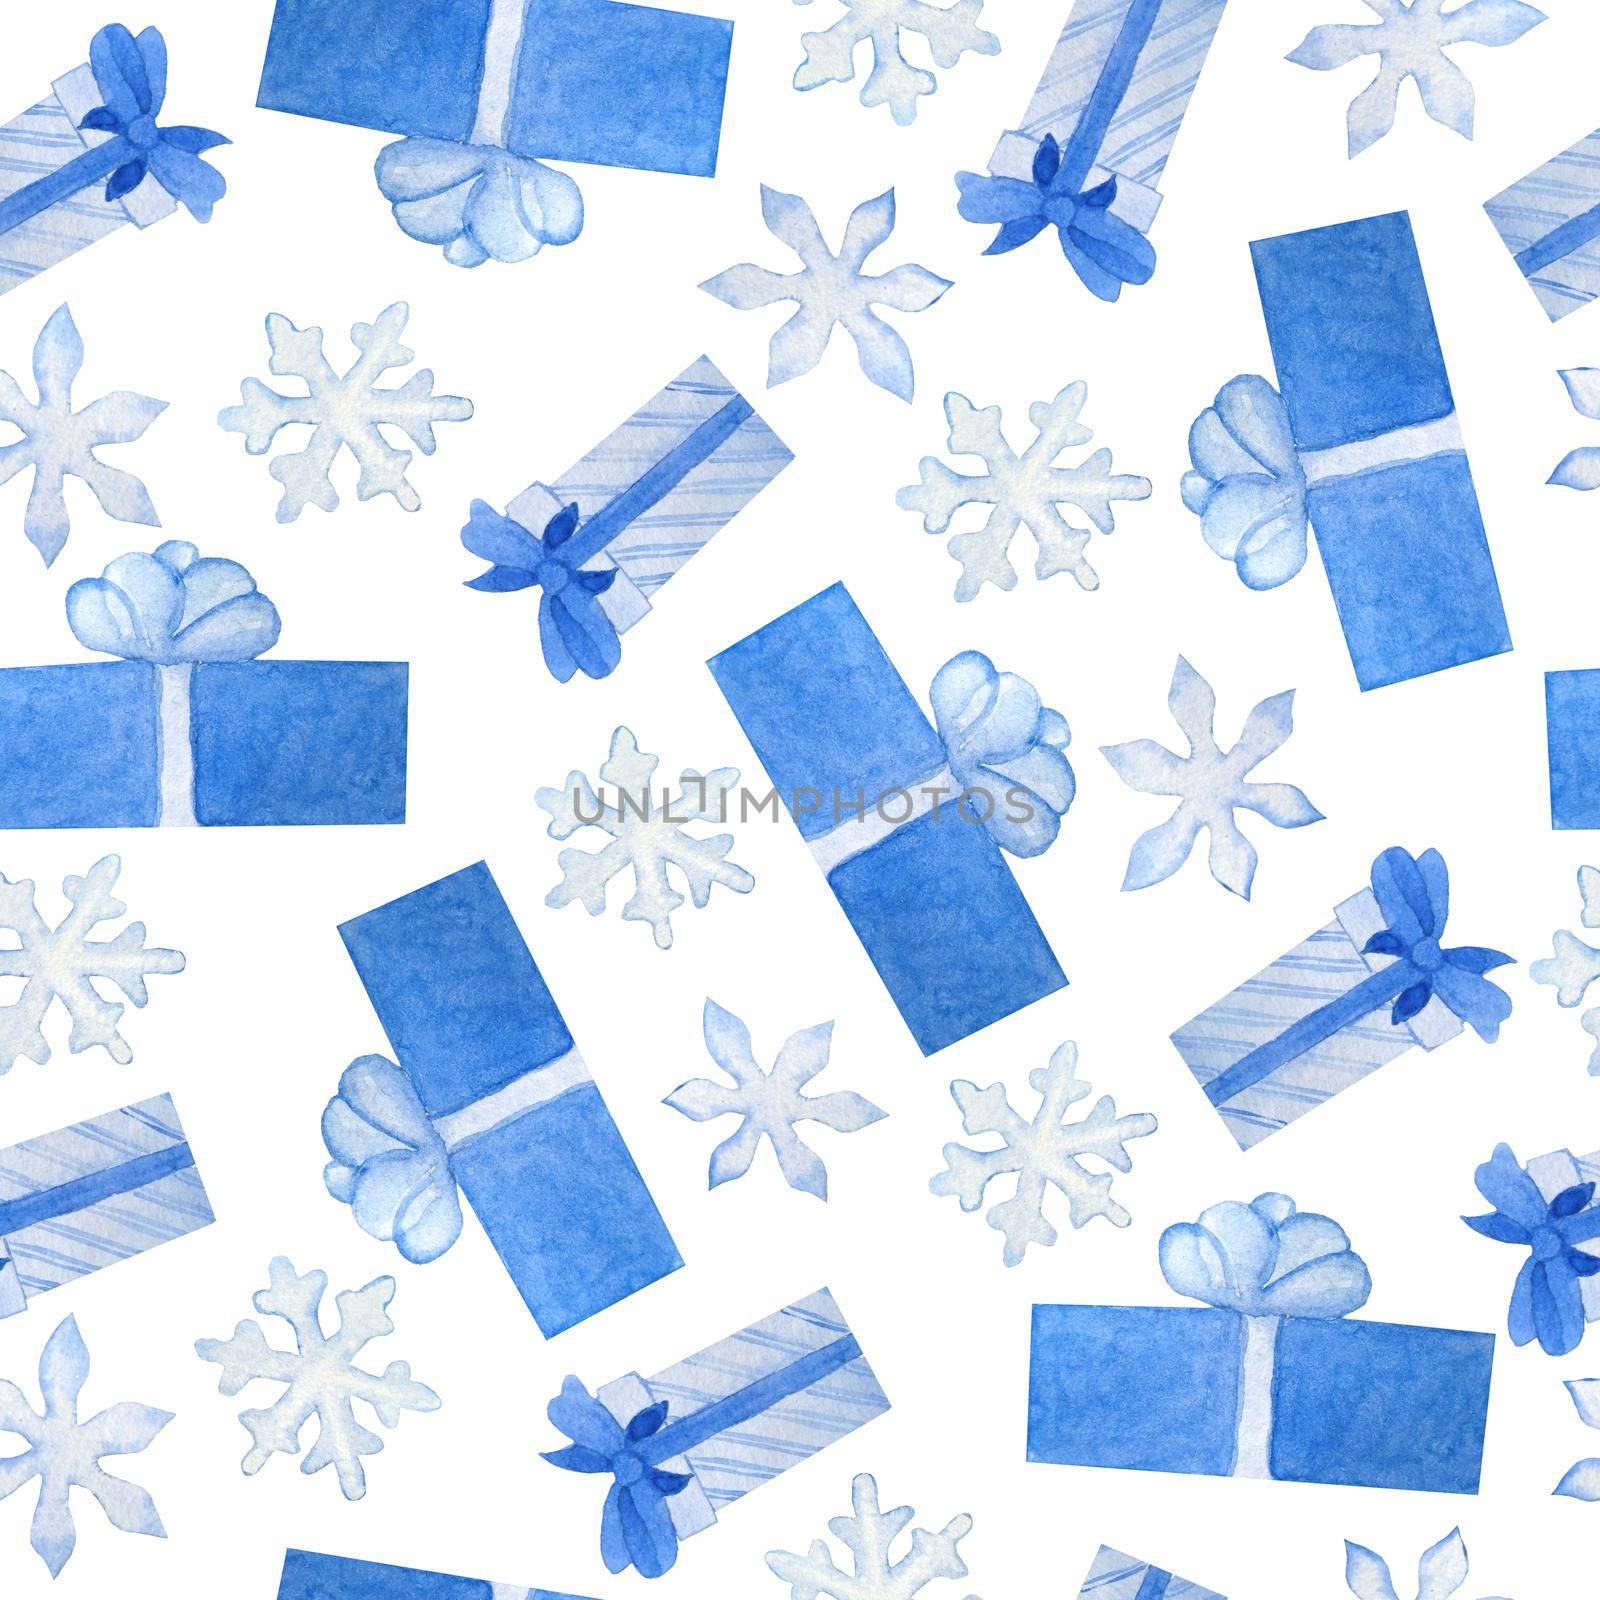 Watercolor seamless hand drawn pattern with blue grey christmas gifts in decor wrapping paper with bows snow snowflakes. Nordic scandinavian neutral colors for new year celebration cards background. by Lagmar